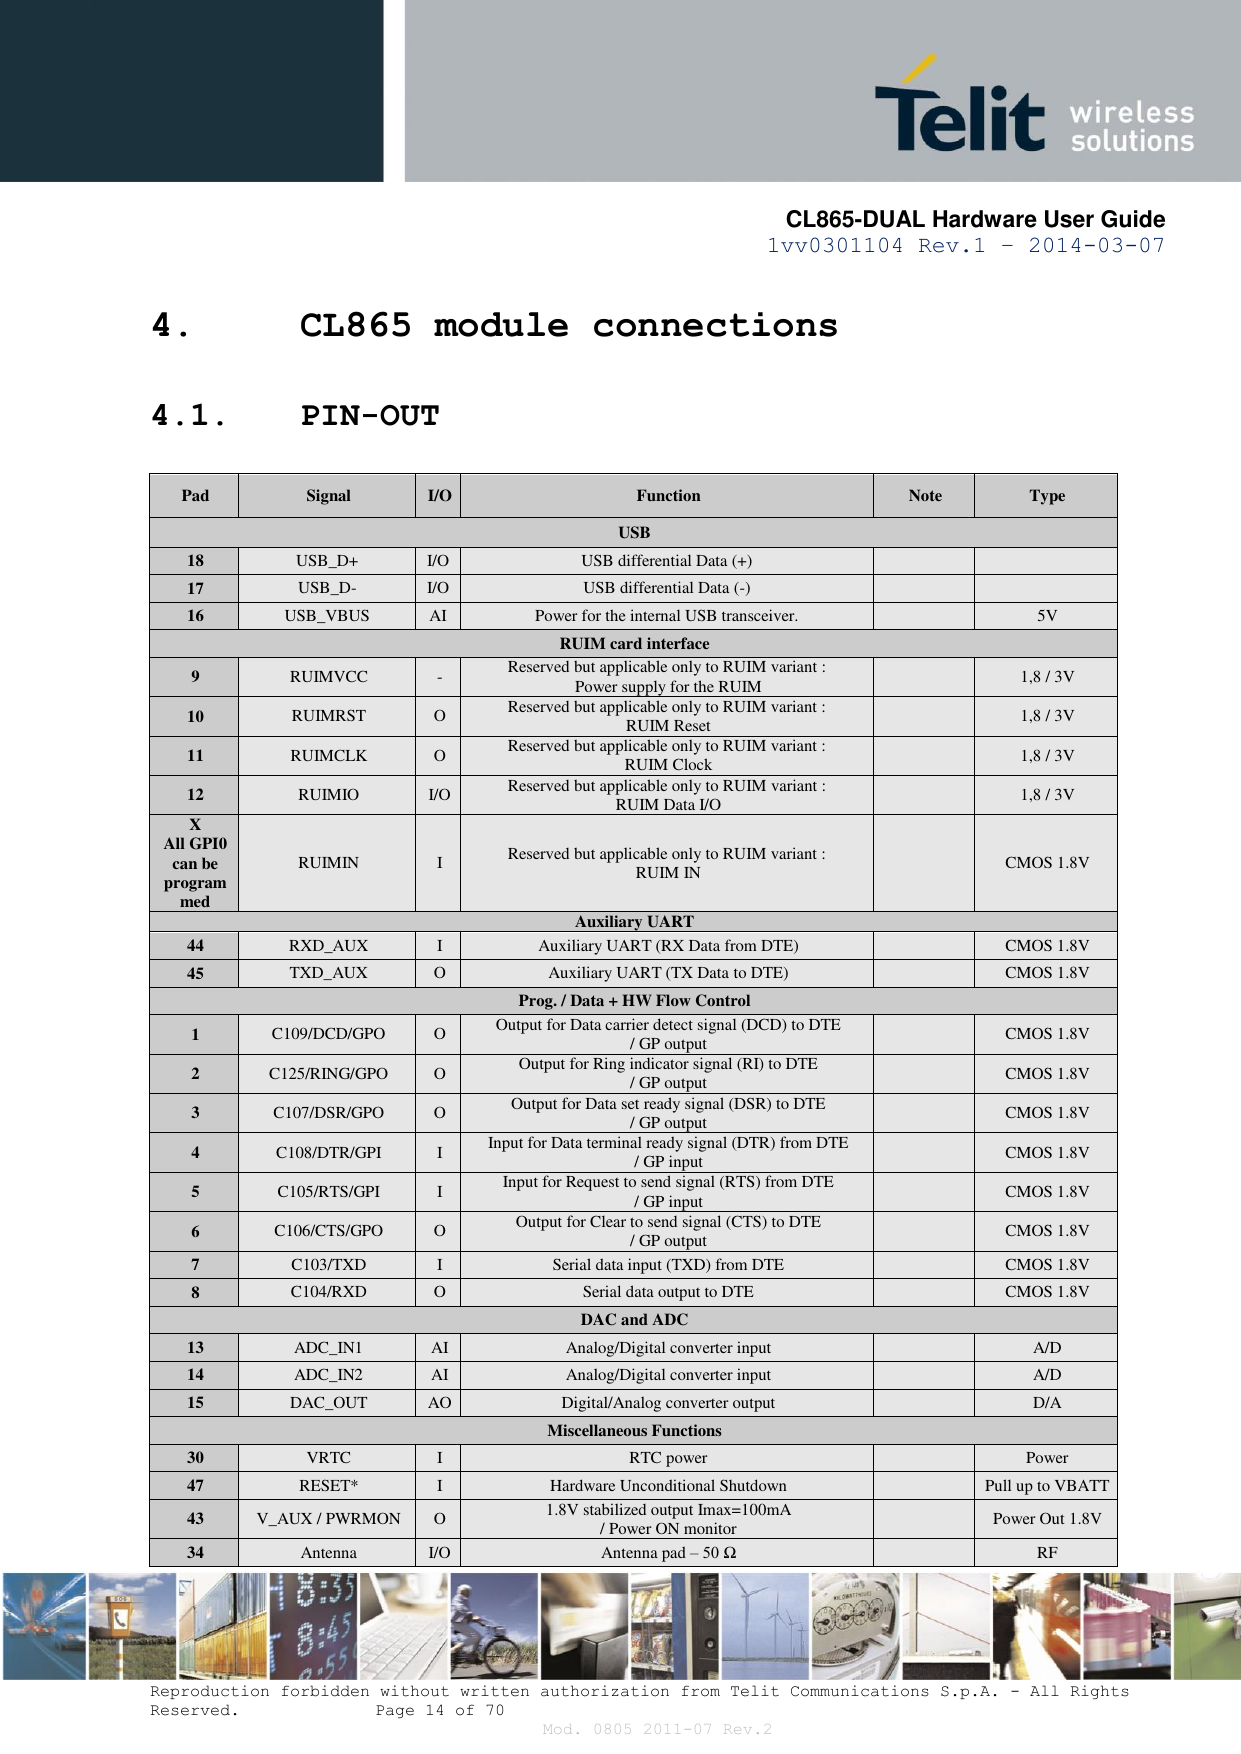       CL865-DUAL Hardware User Guide 1vv0301104 Rev.1 – 2014-03-07  Reproduction forbidden without written authorization from Telit Communications S.p.A. - All Rights Reserved.    Page 14 of 70 Mod. 0805 2011-07 Rev.2 4. CL865 module connections  4.1. PIN-OUT Pad Signal I/O Function Note Type USB 18 USB_D+ I/O USB differential Data (+)   17 USB_D- I/O USB differential Data (-)   16 USB_VBUS AI Power for the internal USB transceiver.  5V RUIM card interface 9 RUIMVCC - Reserved but applicable only to RUIM variant : Power supply for the RUIM  1,8 / 3V 10 RUIMRST O Reserved but applicable only to RUIM variant : RUIM Reset  1,8 / 3V 11 RUIMCLK O Reserved but applicable only to RUIM variant : RUIM Clock  1,8 / 3V 12 RUIMIO I/O Reserved but applicable only to RUIM variant : RUIM Data I/O  1,8 / 3V X All GPI0 can be  programmed RUIMIN I Reserved but applicable only to RUIM variant : RUIM IN  CMOS 1.8V Auxiliary UART 44 RXD_AUX I Auxiliary UART (RX Data from DTE)  CMOS 1.8V 45 TXD_AUX O Auxiliary UART (TX Data to DTE)  CMOS 1.8V Prog. / Data + HW Flow Control 1 C109/DCD/GPO O Output for Data carrier detect signal (DCD) to DTE  / GP output  CMOS 1.8V 2 C125/RING/GPO O Output for Ring indicator signal (RI) to DTE / GP output  CMOS 1.8V 3 C107/DSR/GPO O Output for Data set ready signal (DSR) to DTE / GP output  CMOS 1.8V 4 C108/DTR/GPI I Input for Data terminal ready signal (DTR) from DTE / GP input  CMOS 1.8V 5 C105/RTS/GPI I Input for Request to send signal (RTS) from DTE / GP input  CMOS 1.8V 6 C106/CTS/GPO O Output for Clear to send signal (CTS) to DTE / GP output  CMOS 1.8V 7 C103/TXD I Serial data input (TXD) from DTE  CMOS 1.8V 8 C104/RXD O Serial data output to DTE  CMOS 1.8V DAC and ADC 13 ADC_IN1 AI Analog/Digital converter input  A/D 14 ADC_IN2 AI Analog/Digital converter input  A/D 15 DAC_OUT AO Digital/Analog converter output  D/A Miscellaneous Functions 30 VRTC I RTC power  Power 47 RESET* I Hardware Unconditional Shutdown  Pull up to VBATT 43 V_AUX / PWRMON O 1.8V stabilized output Imax=100mA / Power ON monitor   Power Out 1.8V 34 Antenna I/O Antenna pad – 50 Ω  RF 